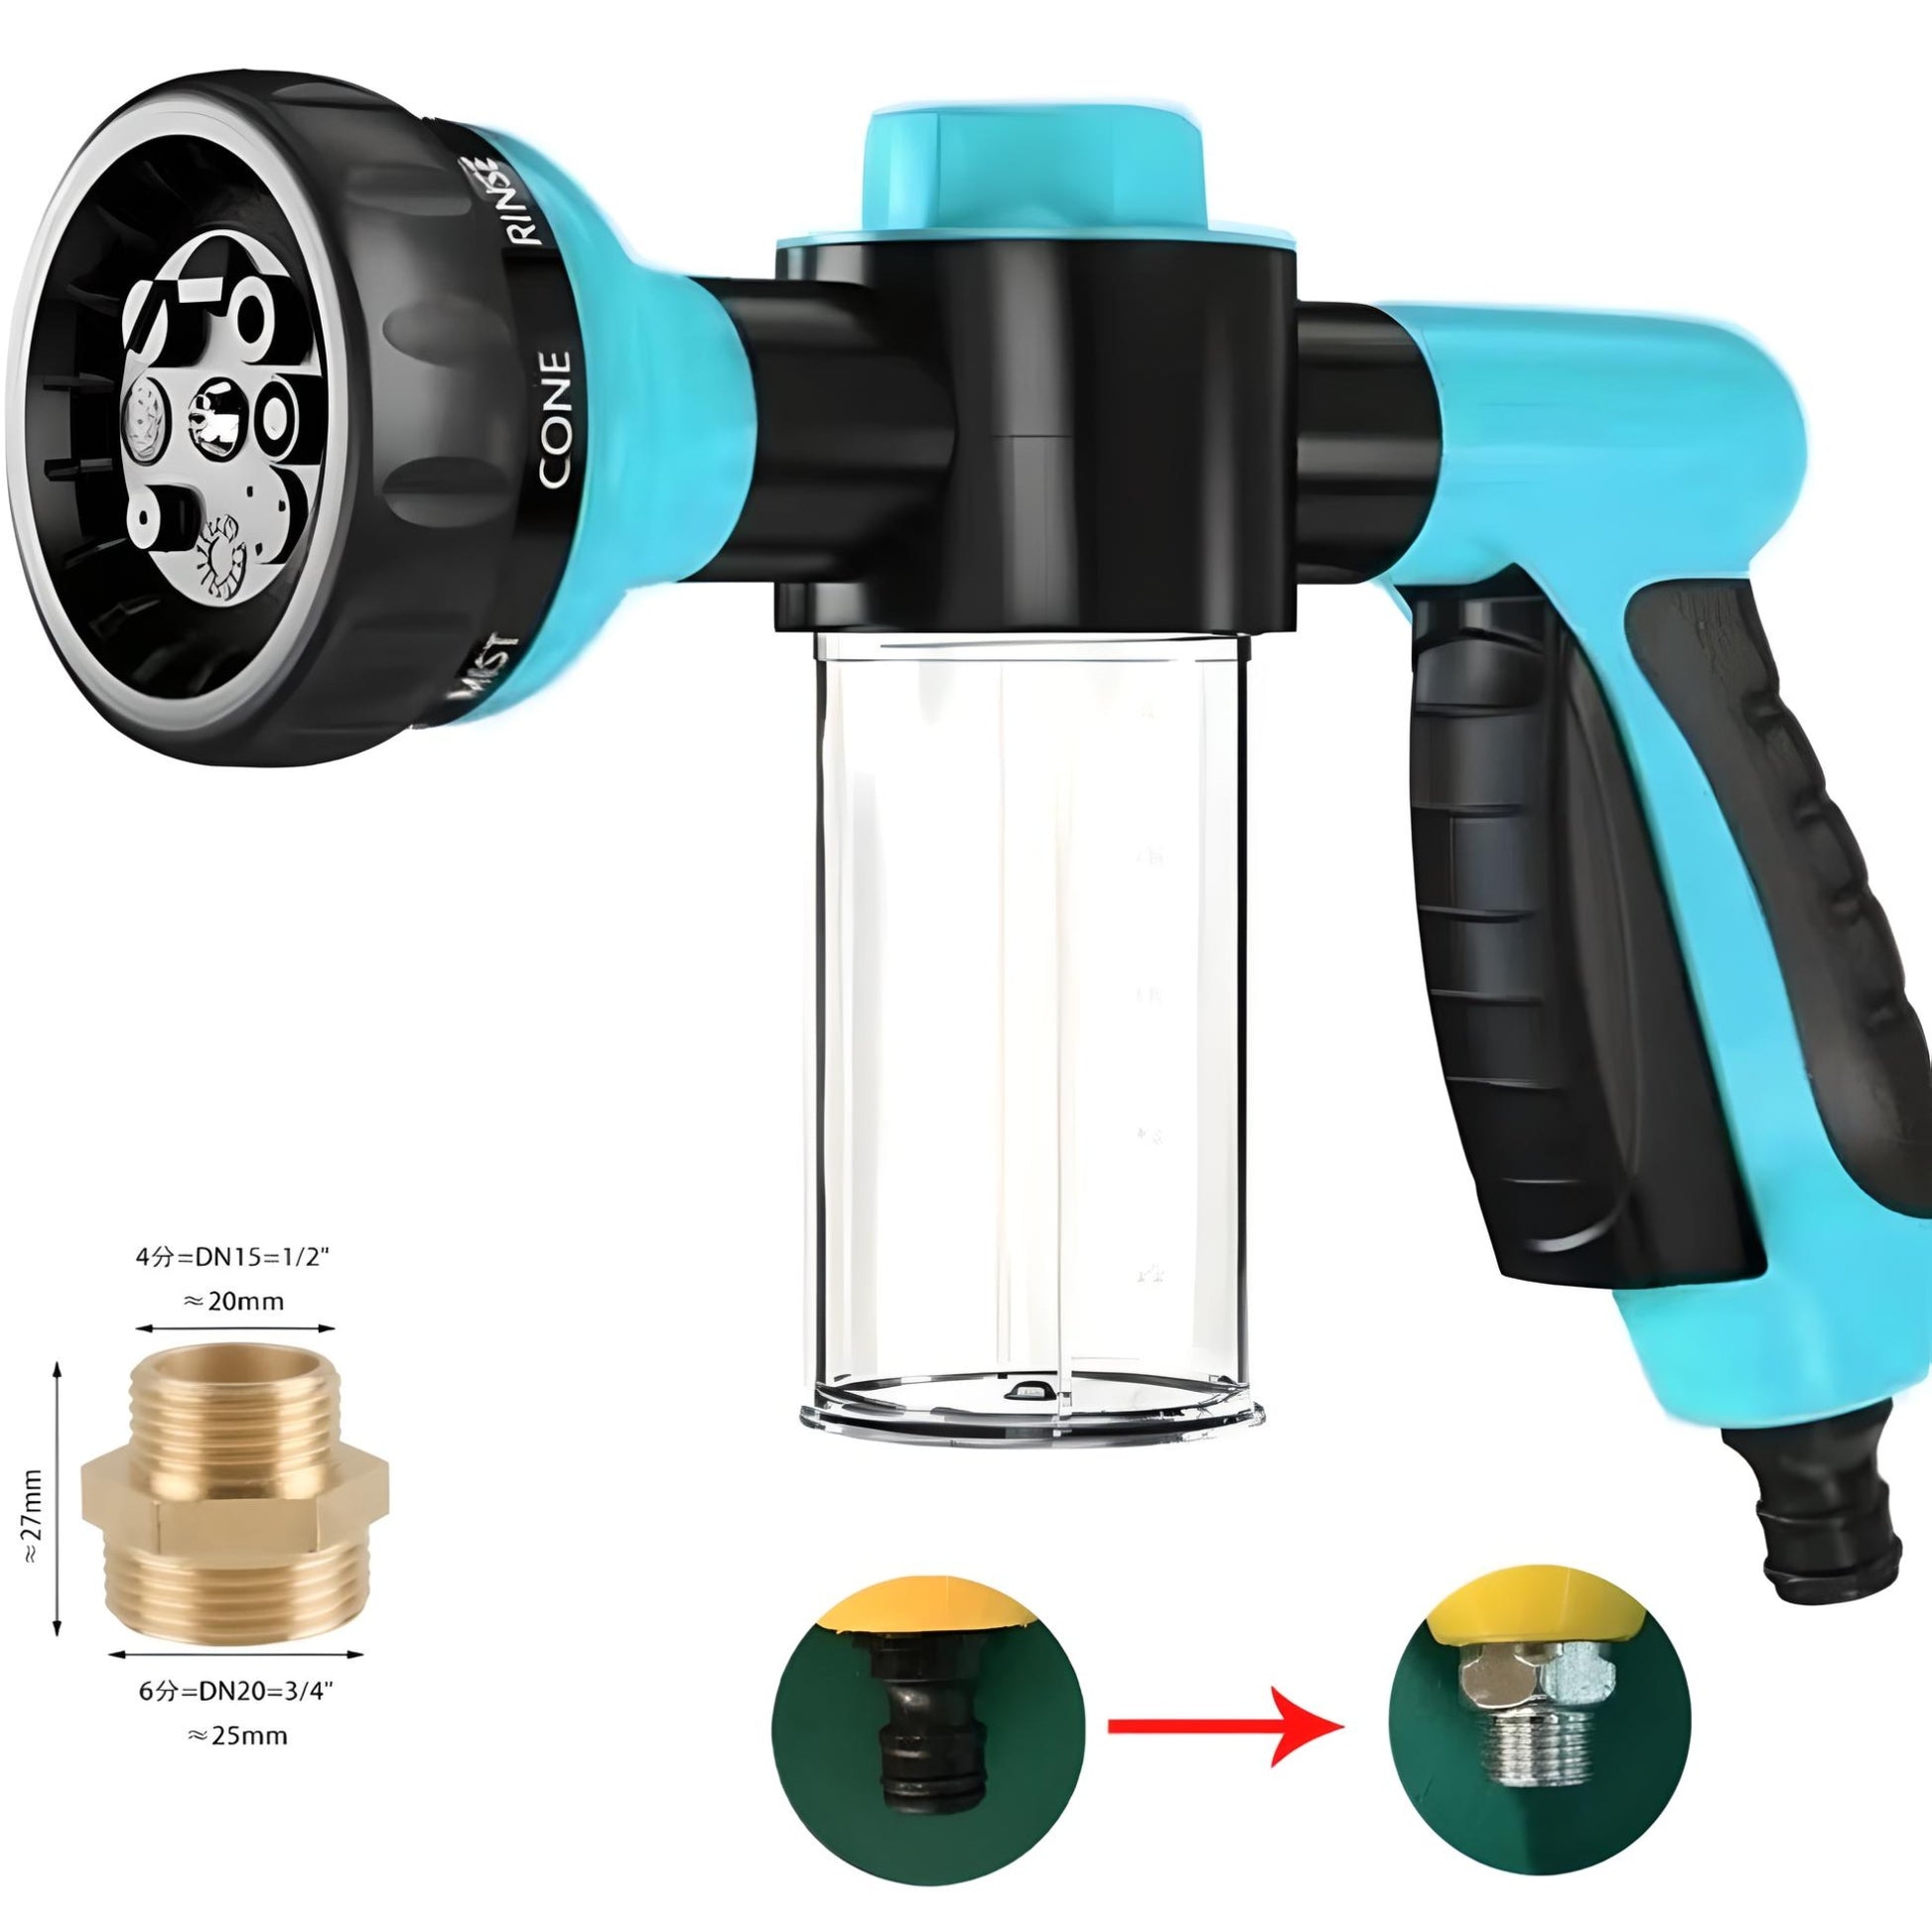  Blue Pup Jet Dog Wash Hose Attachment with Soap Dispenser and Shower Adapter